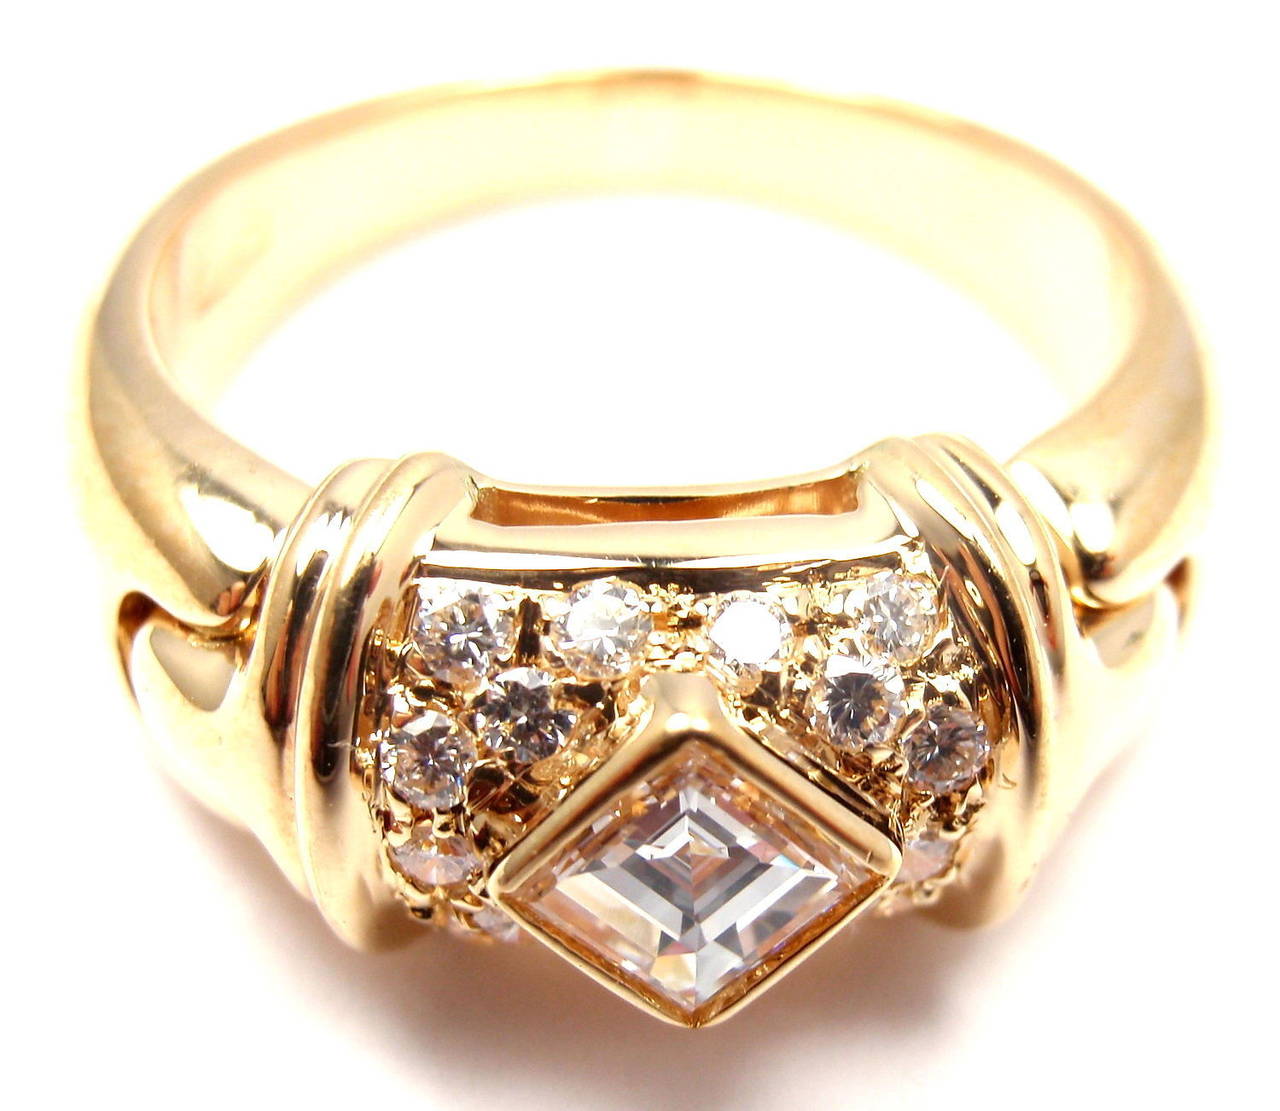 18k Yellow Gold Diamond Ring by Bulgari. 
With 16 Round Brilliant cut Diamonds & 1 princess cut diamonds approximately weighing .45cts With G Color And VS1 Clarity

Details:
Ring size: 5.5(can be resized)
Width: 8mm
Weight: 7.3 grams
Stamped